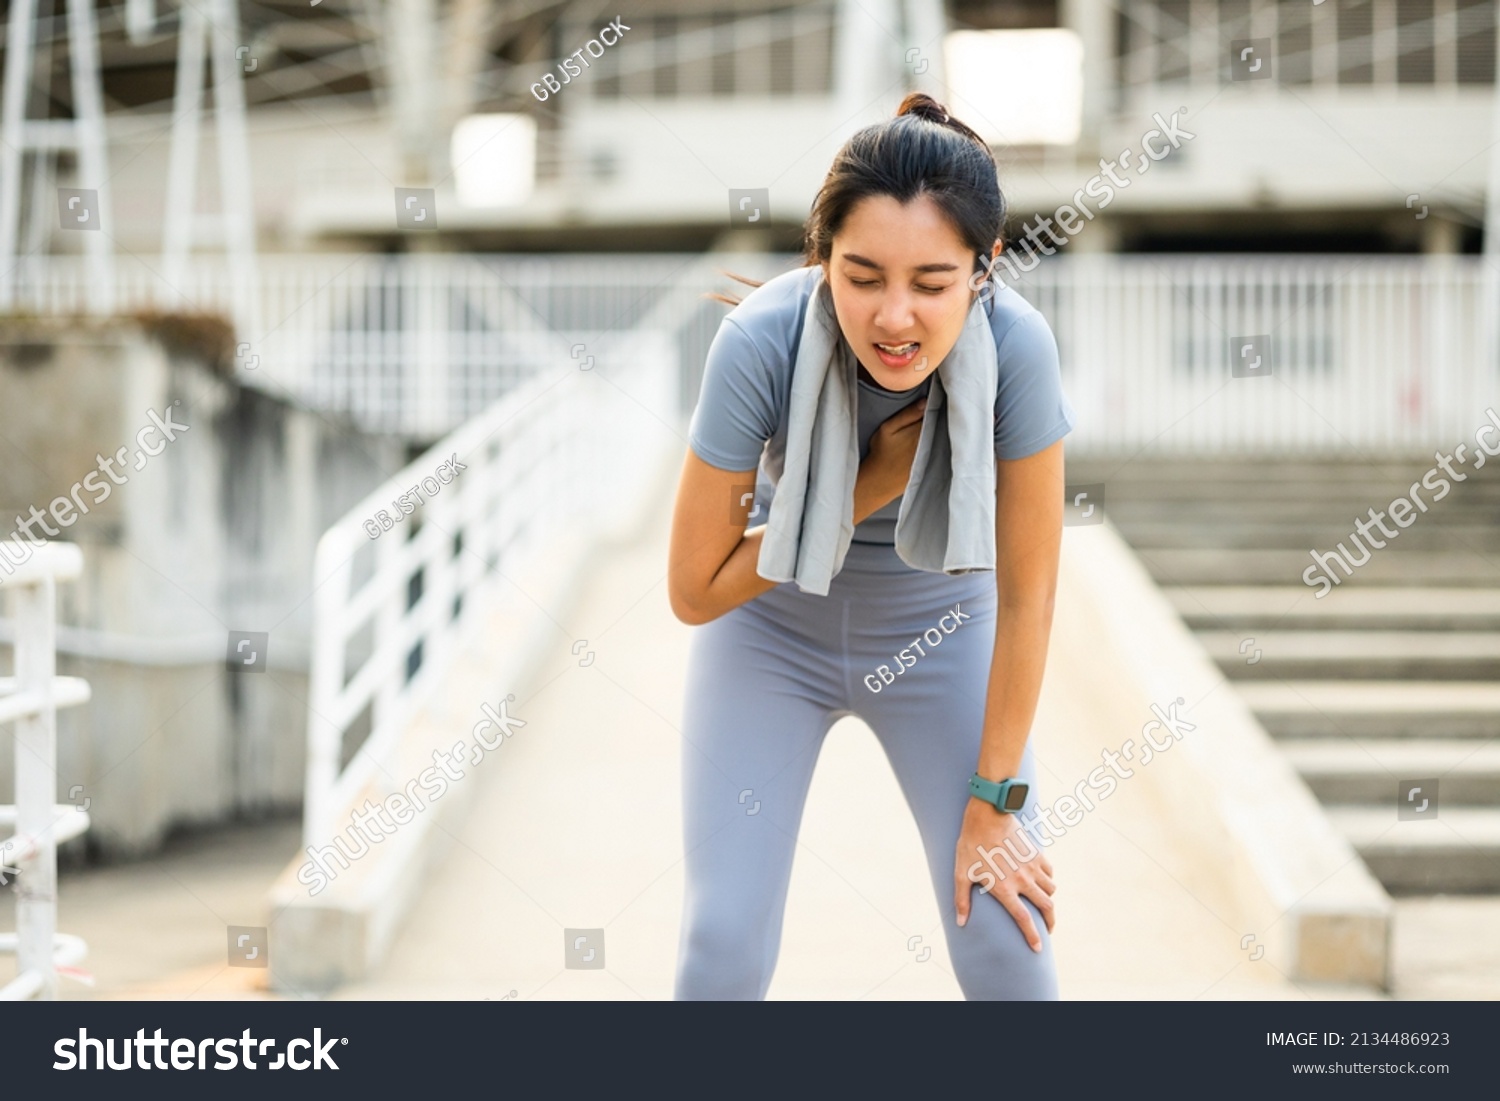 Beautiful woman tired during jogging in the city at sunrise. Young asian female intense training workout challenge breathing exhausted. Exercise in the morning. Healthy and active lifestyle concept. #2134486923